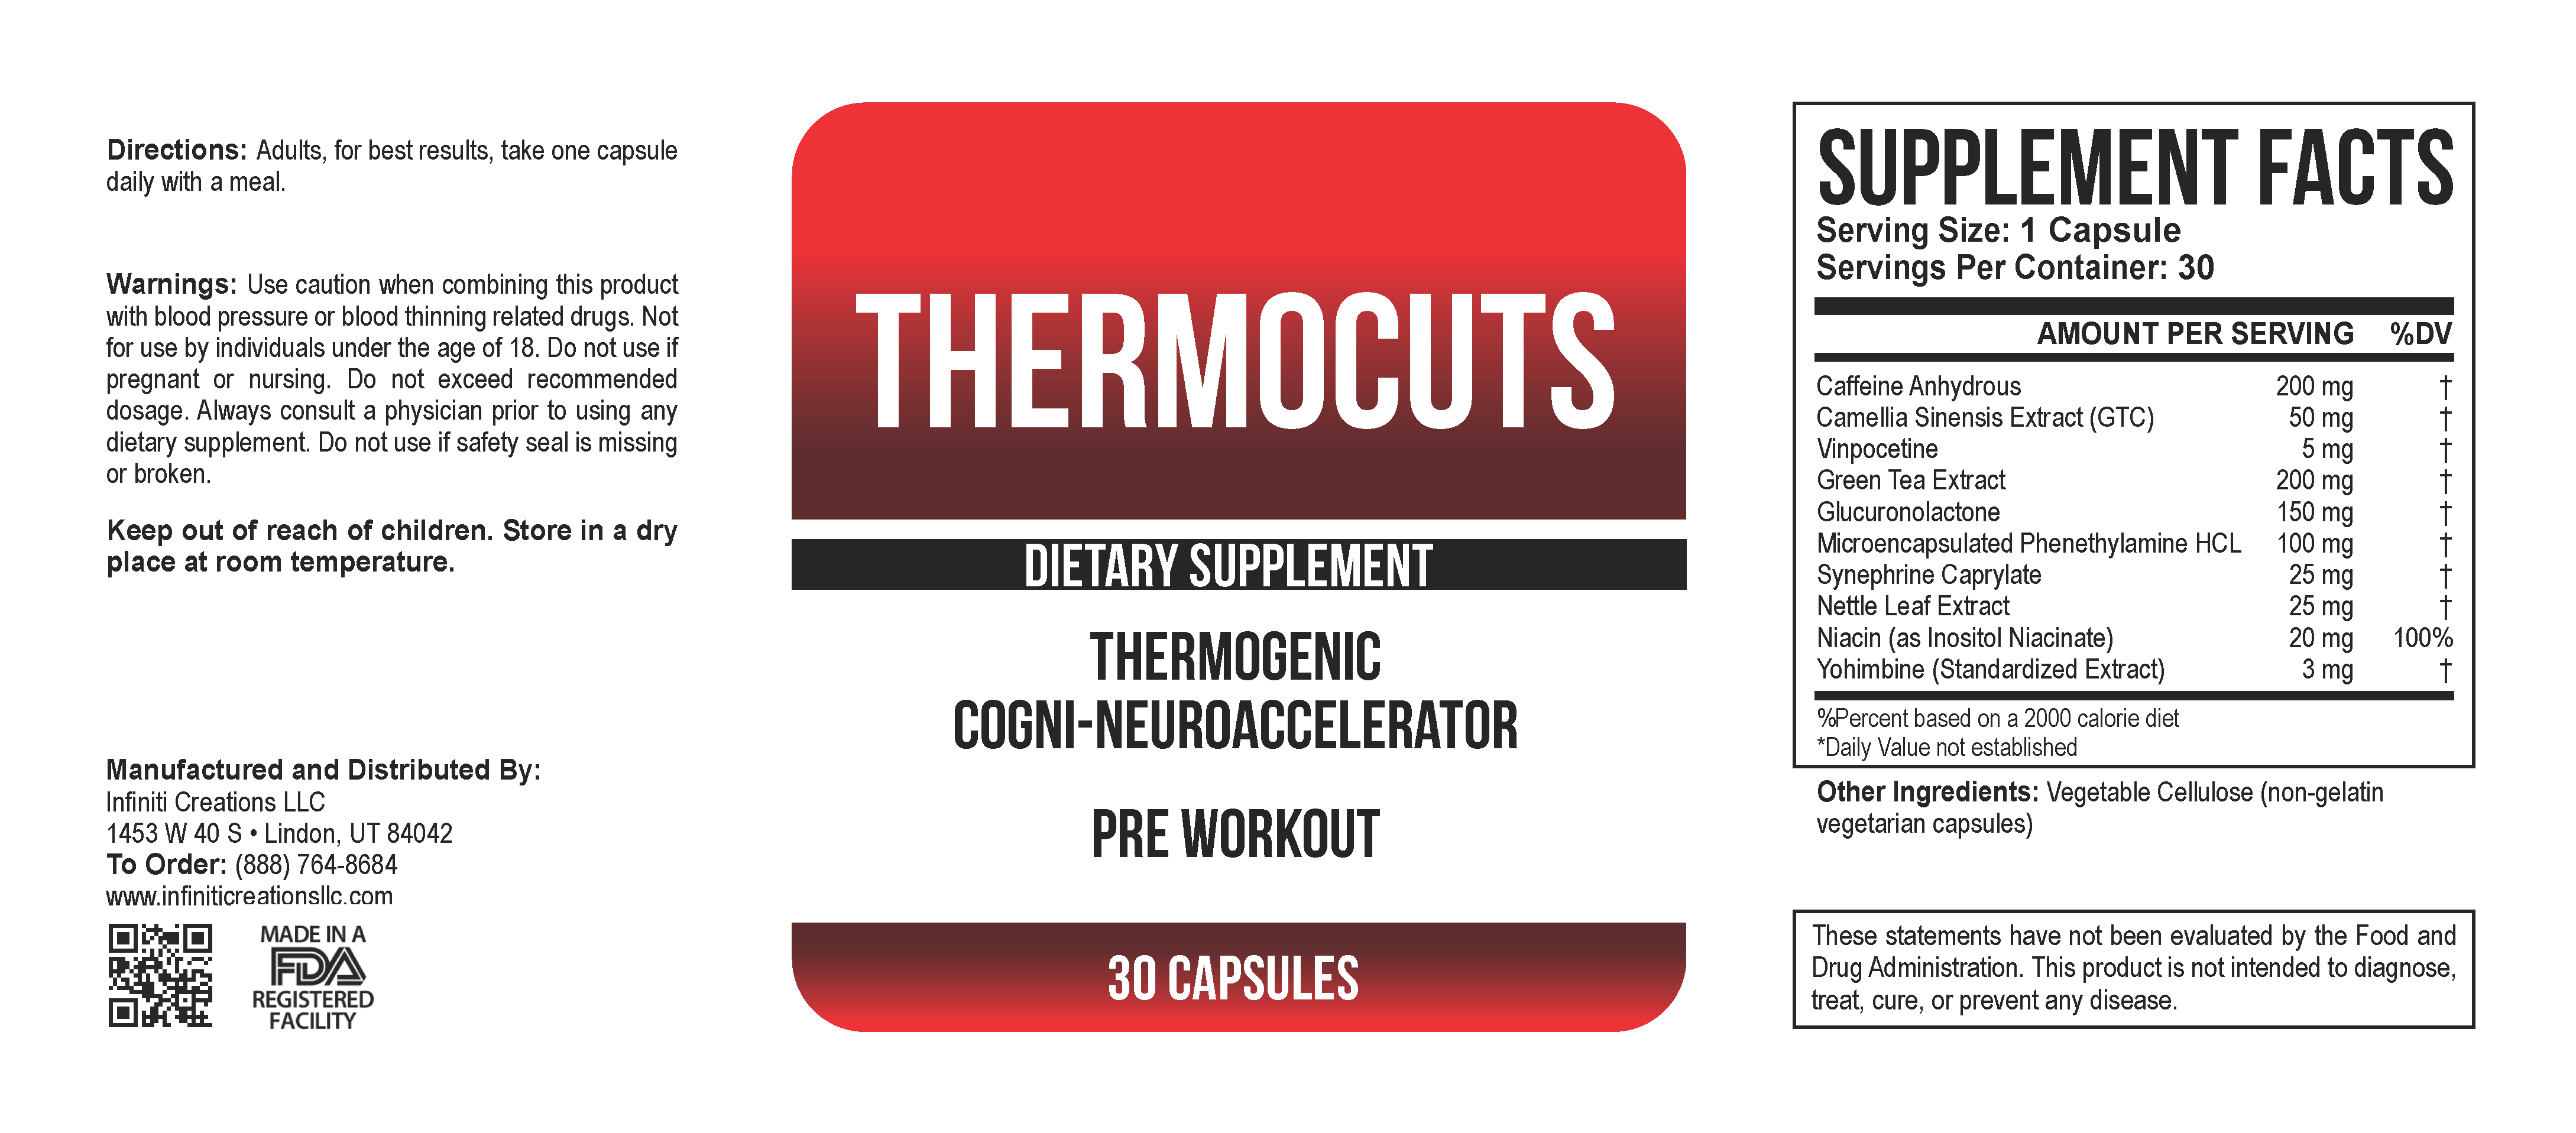 infiniti-creations-thermocuts-30ct-v2.png